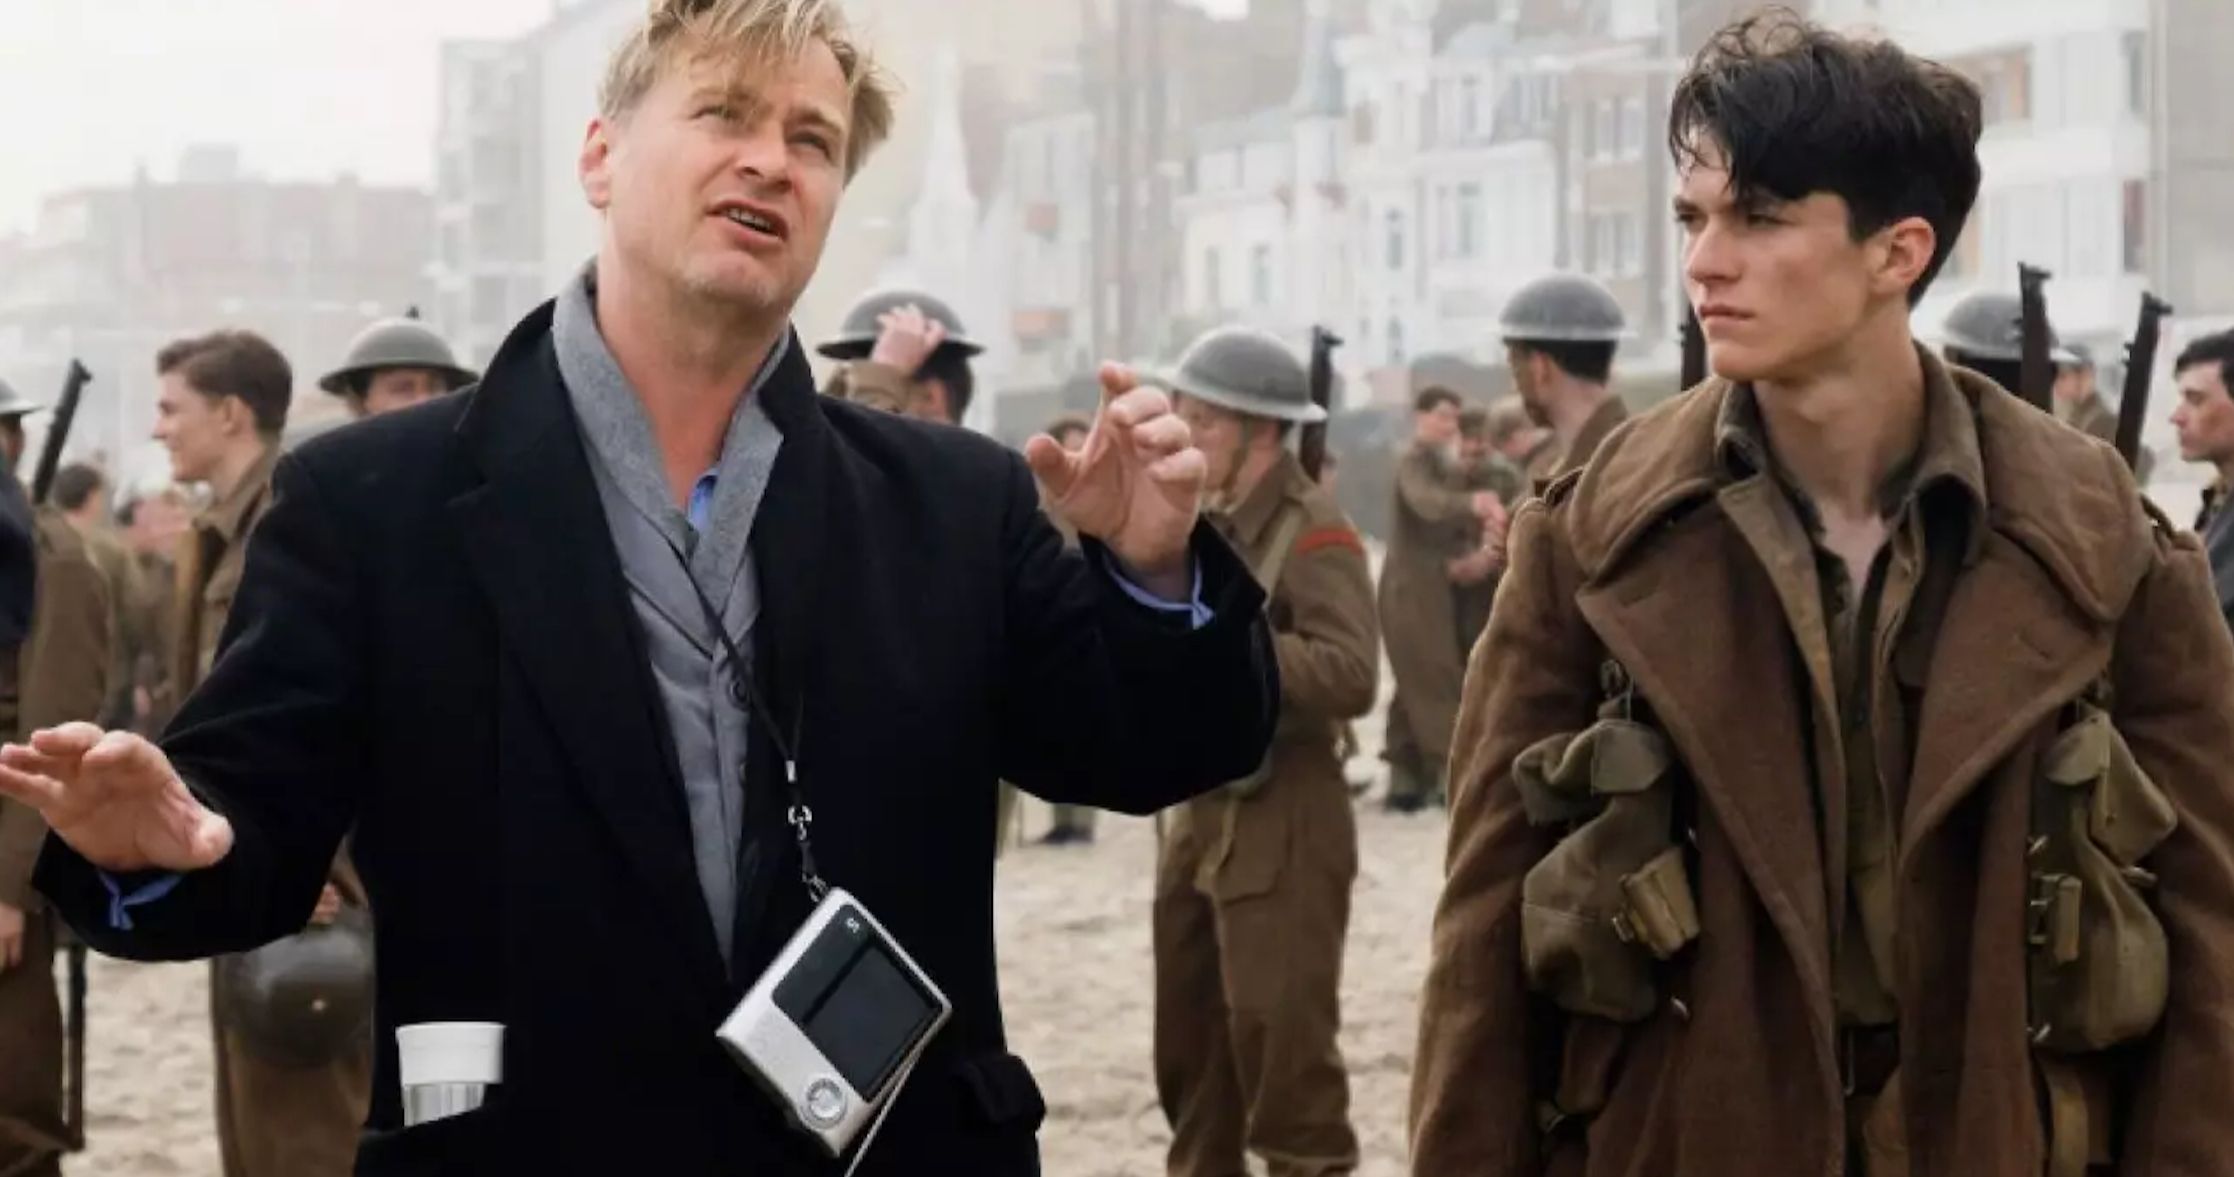 Christopher Nolan's Next Movie Is About the Creation of the Atom Bomb During WWII